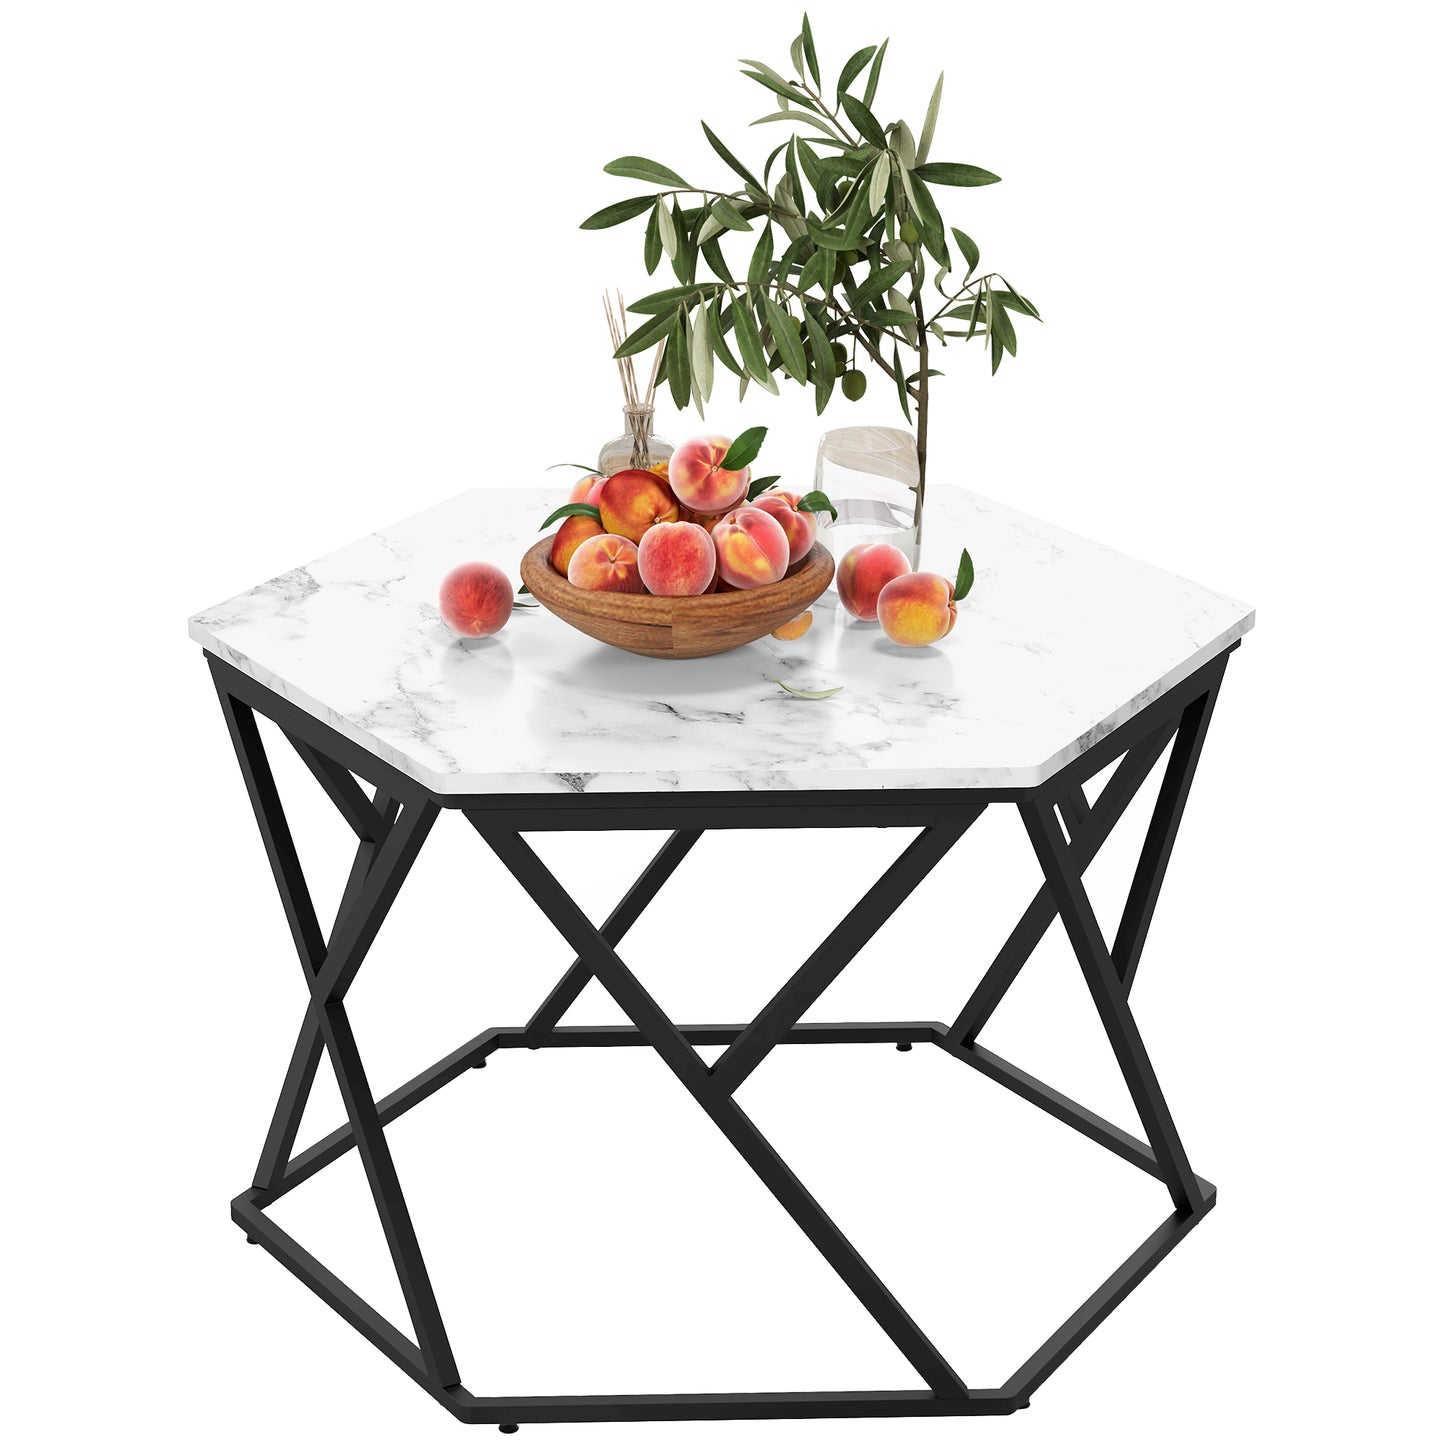 Modern Coffee Table, Cocktail Table with High Gloss Marble Effect Top, Steel Frame, for Living Room, White Marble, HOMCOM, 1